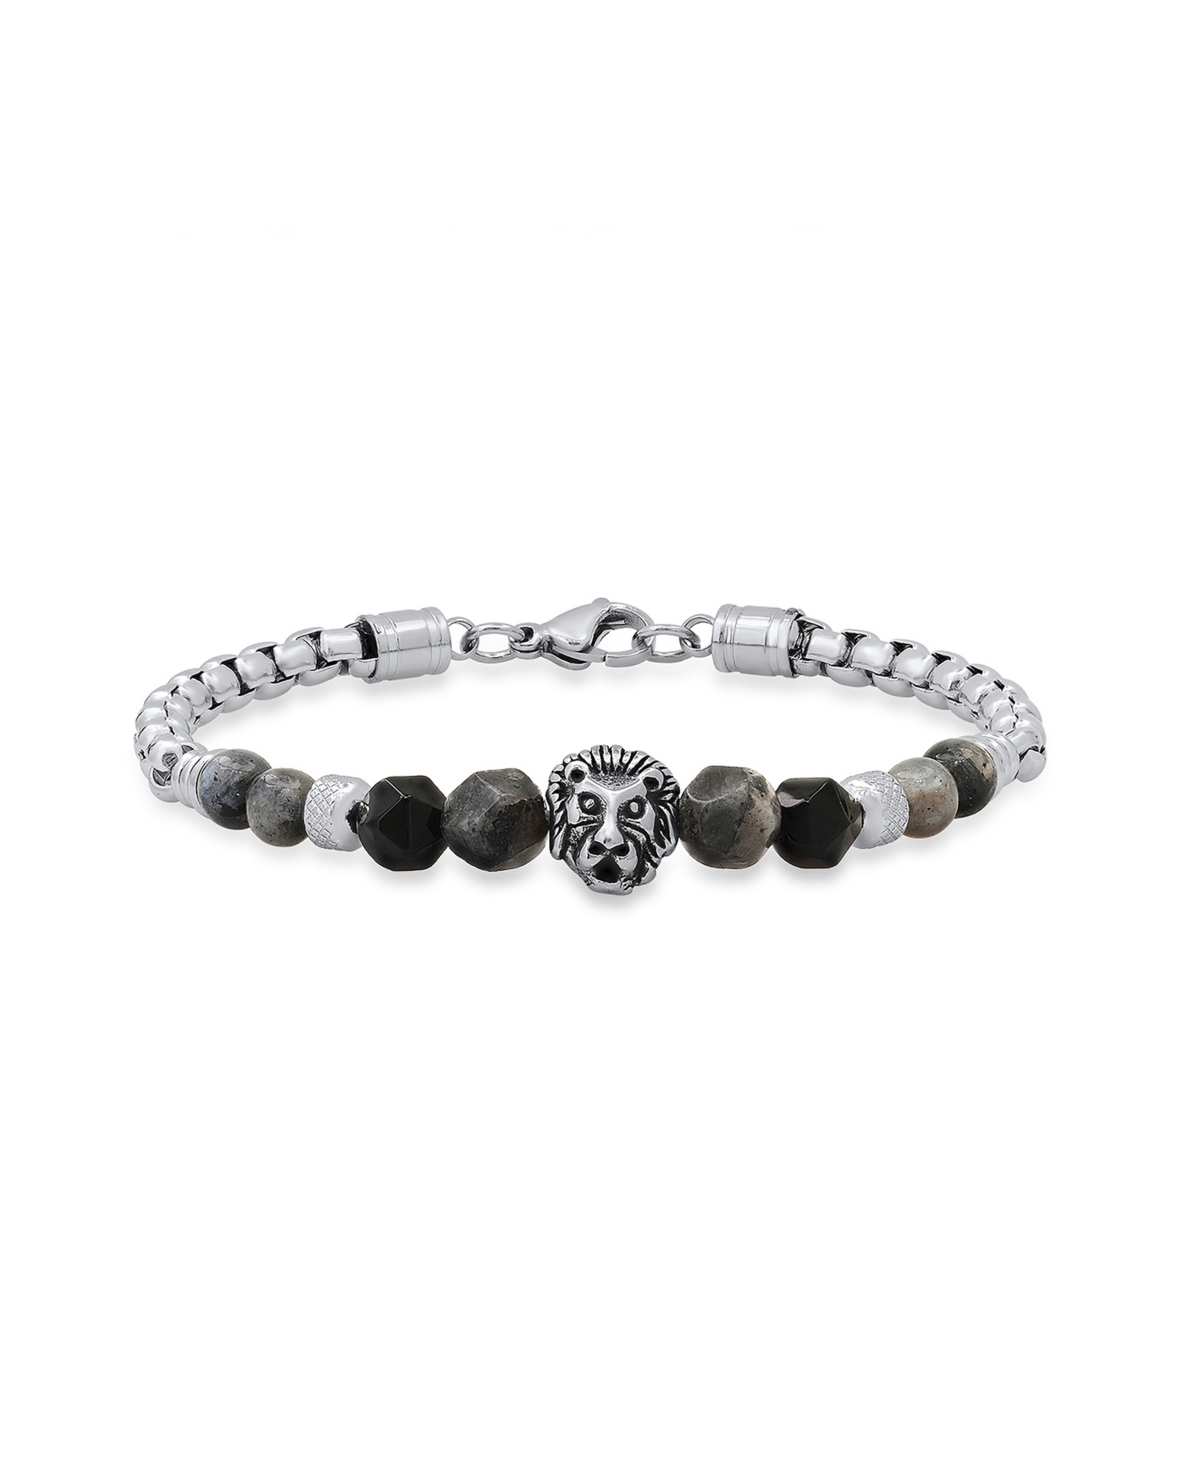 Men's Stainless Steel Curb Chain Link Bracelet and Black or Gray Agate Stones with Lion Charm - Multi